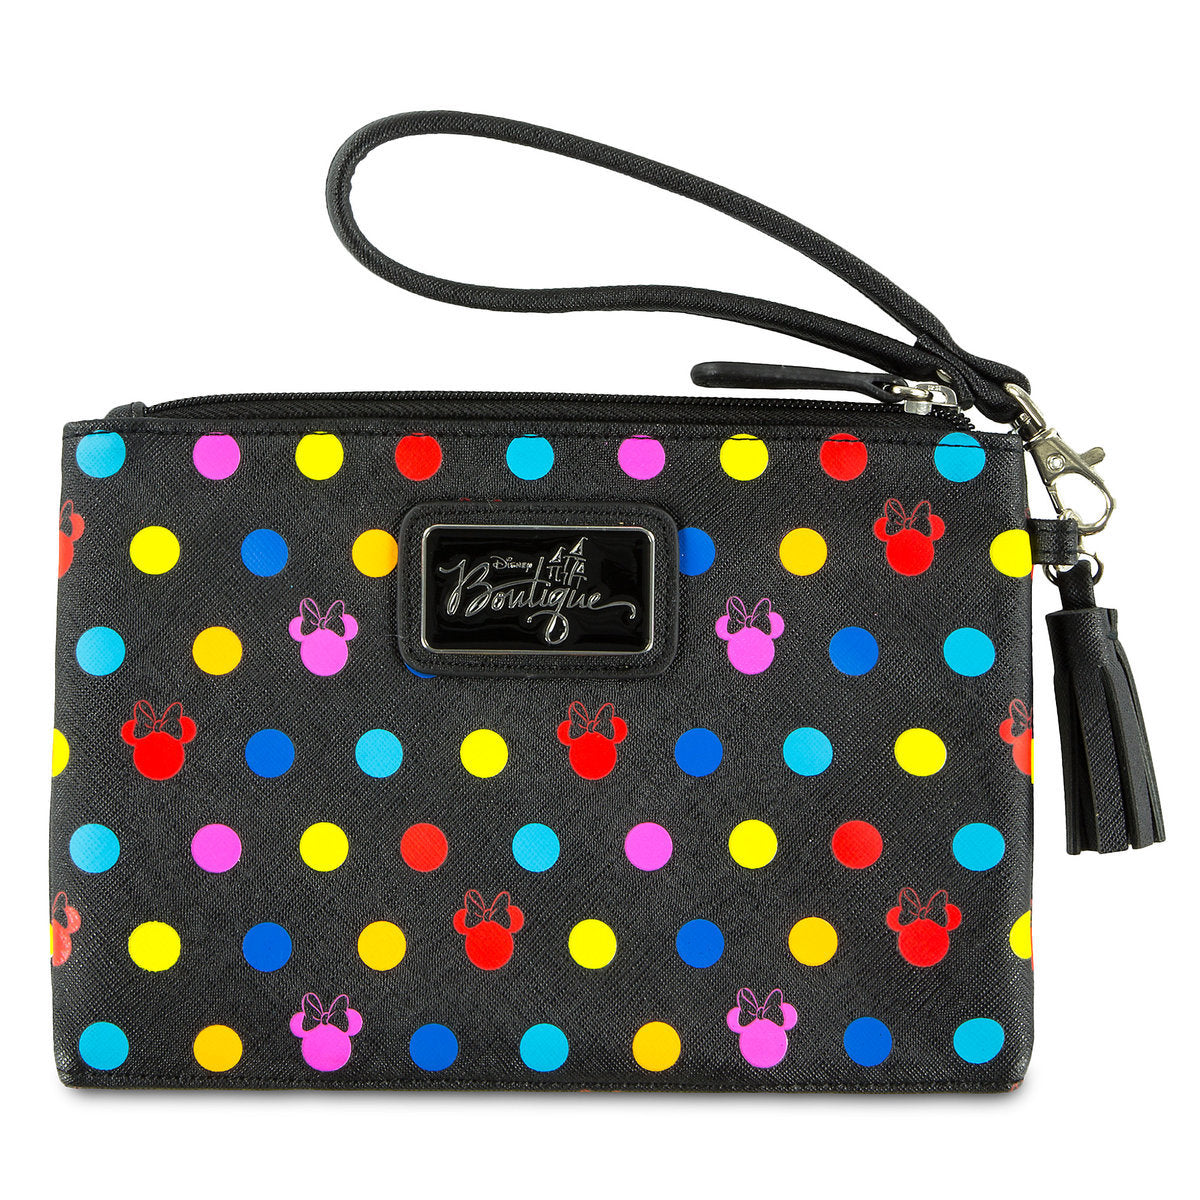 Disney Boutique Minnie Mouse Polka Dot Wristlet New with Tags